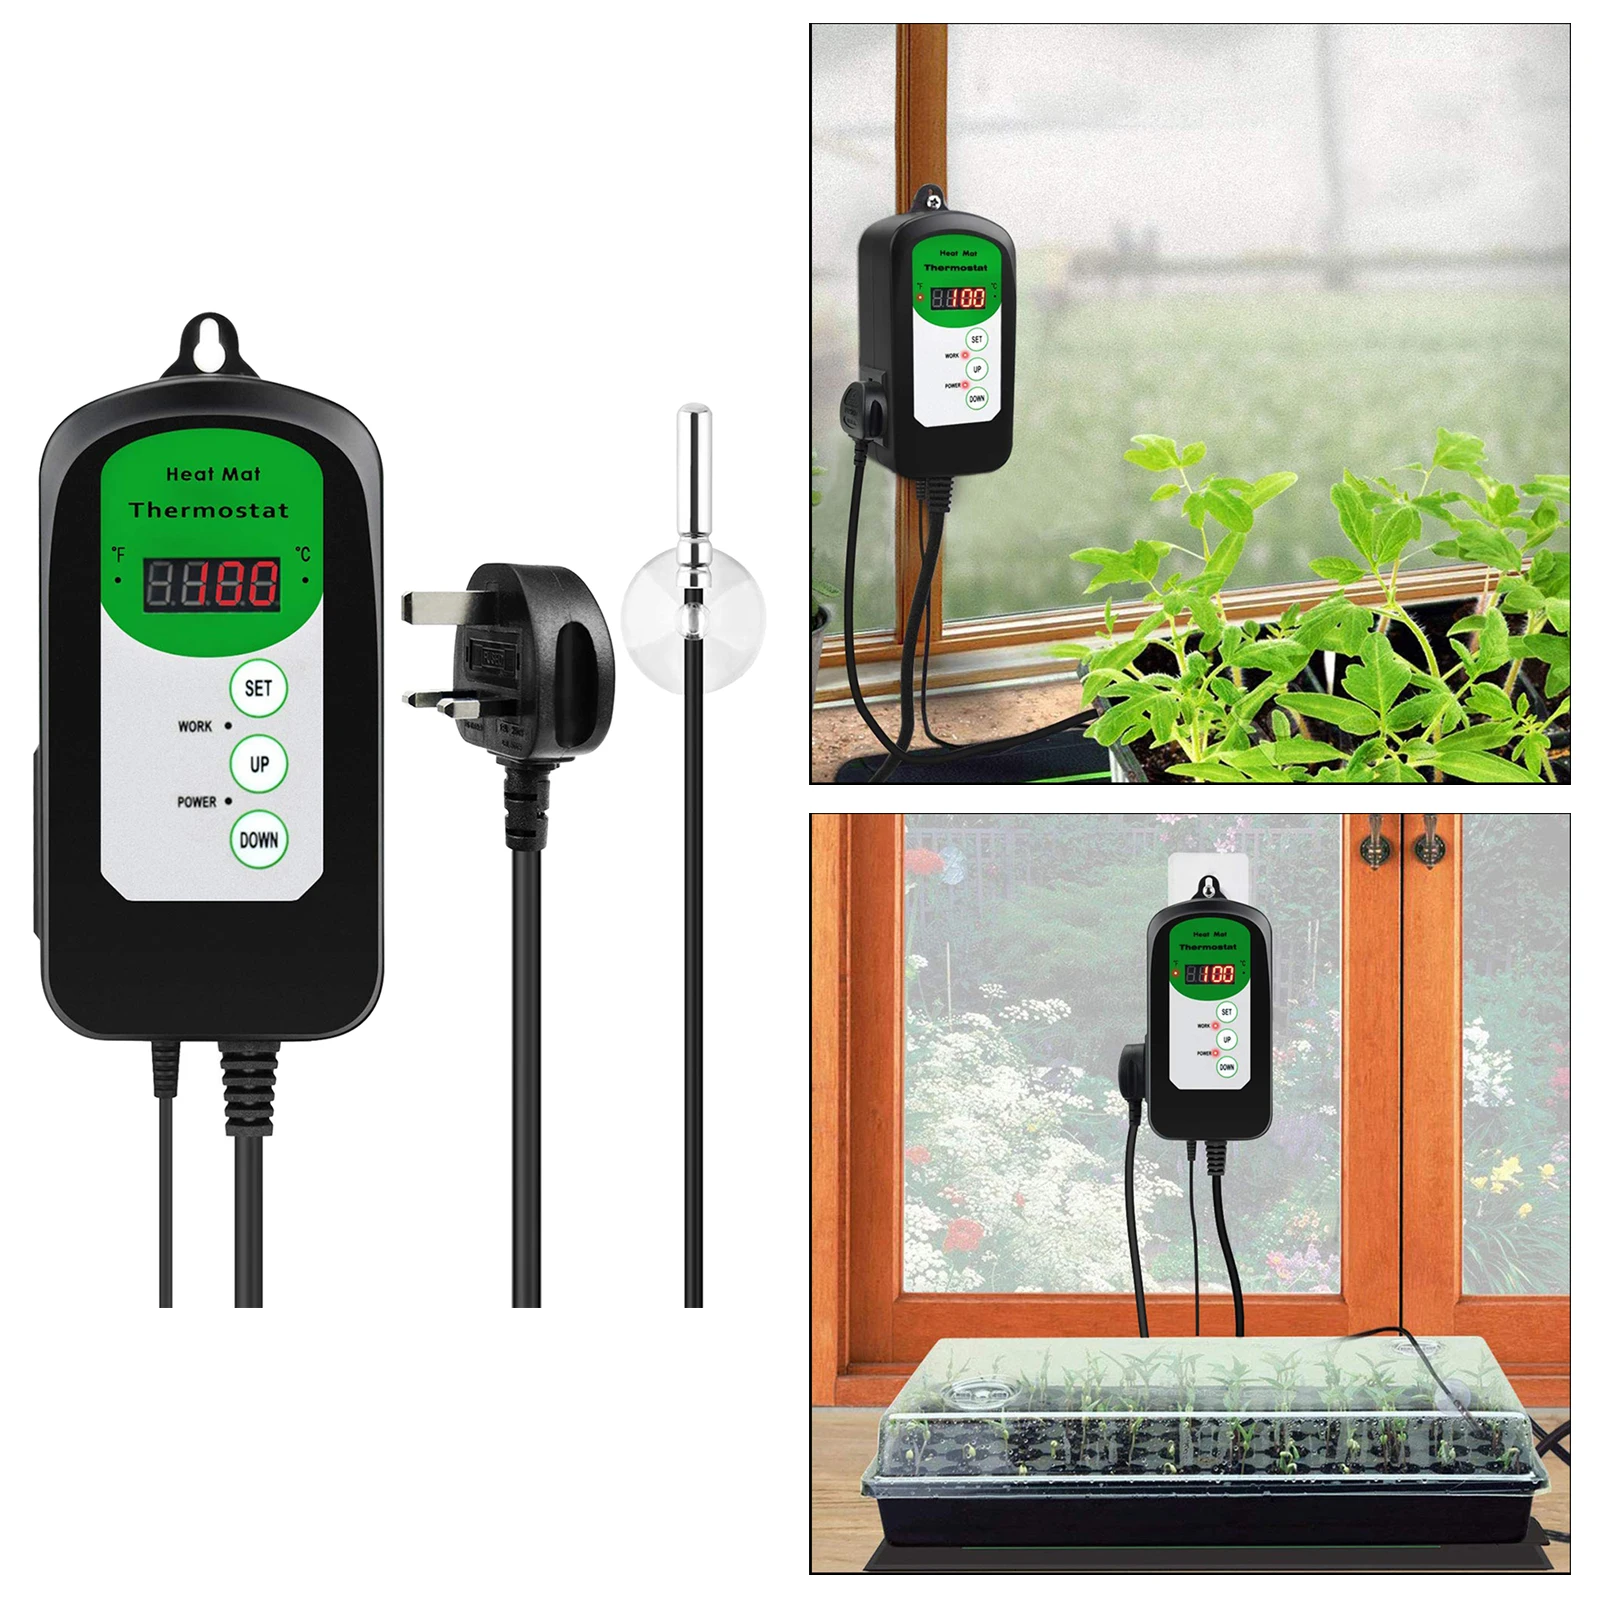 1000W 240V Digital Heat Mat Thermostat Temperature Controller for Hydroponic Plants Seed Germination Reptiles Pet Supplies